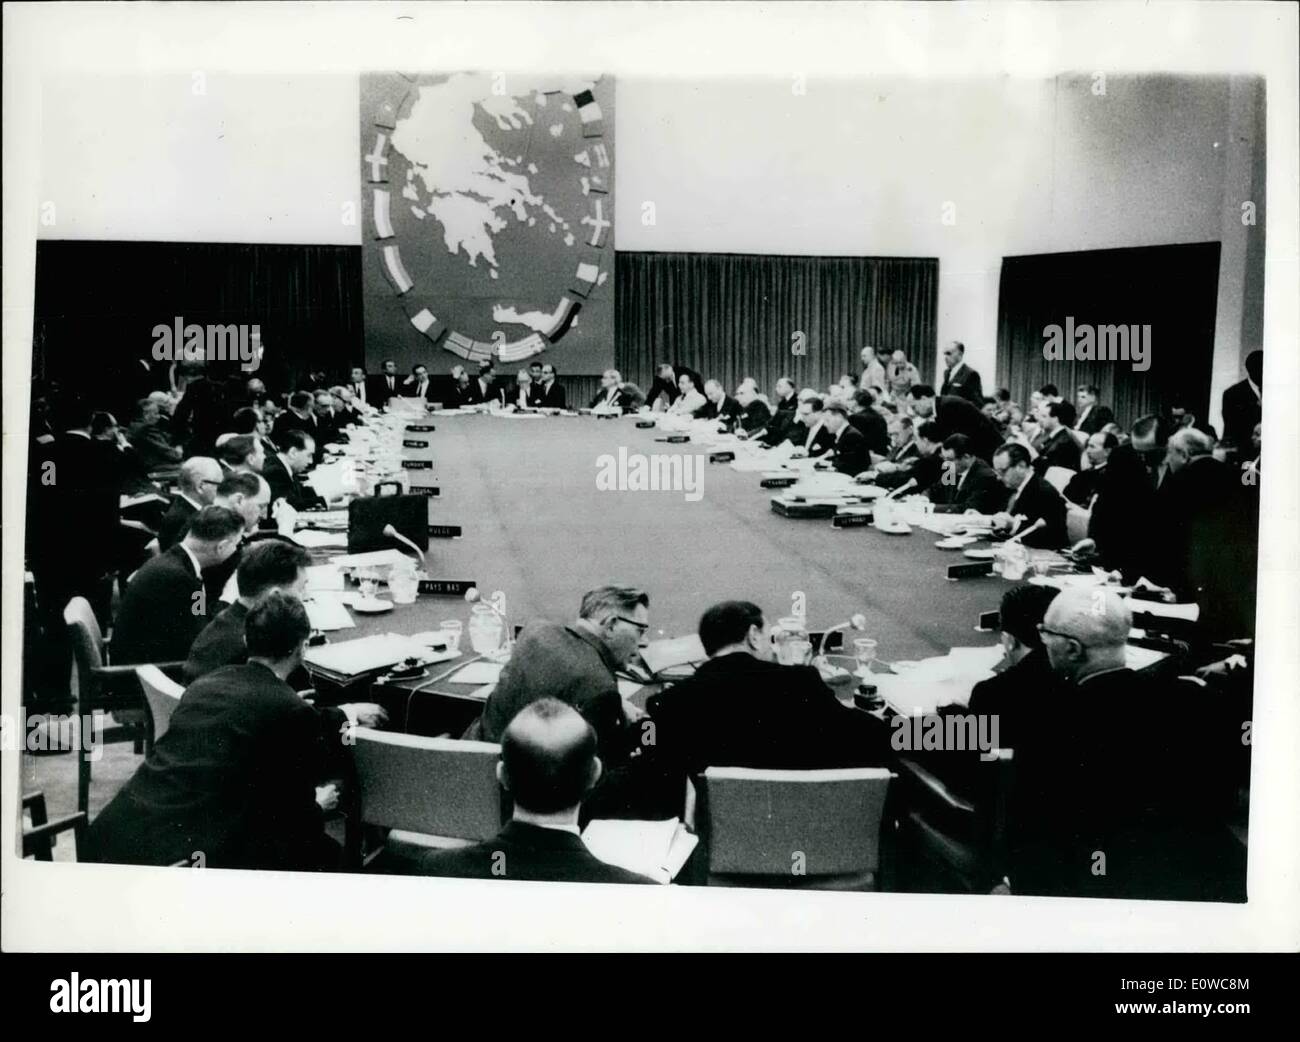 May 05, 1962 - NATO CONFERENCE HELD IN ATHENS. Foreign Ministers and National Defence Ministers of the NATO countries are attending a NATO conference in ATHENS. PHOTO SHOWS: General view of the meeting in ATHENS. Stock Photo